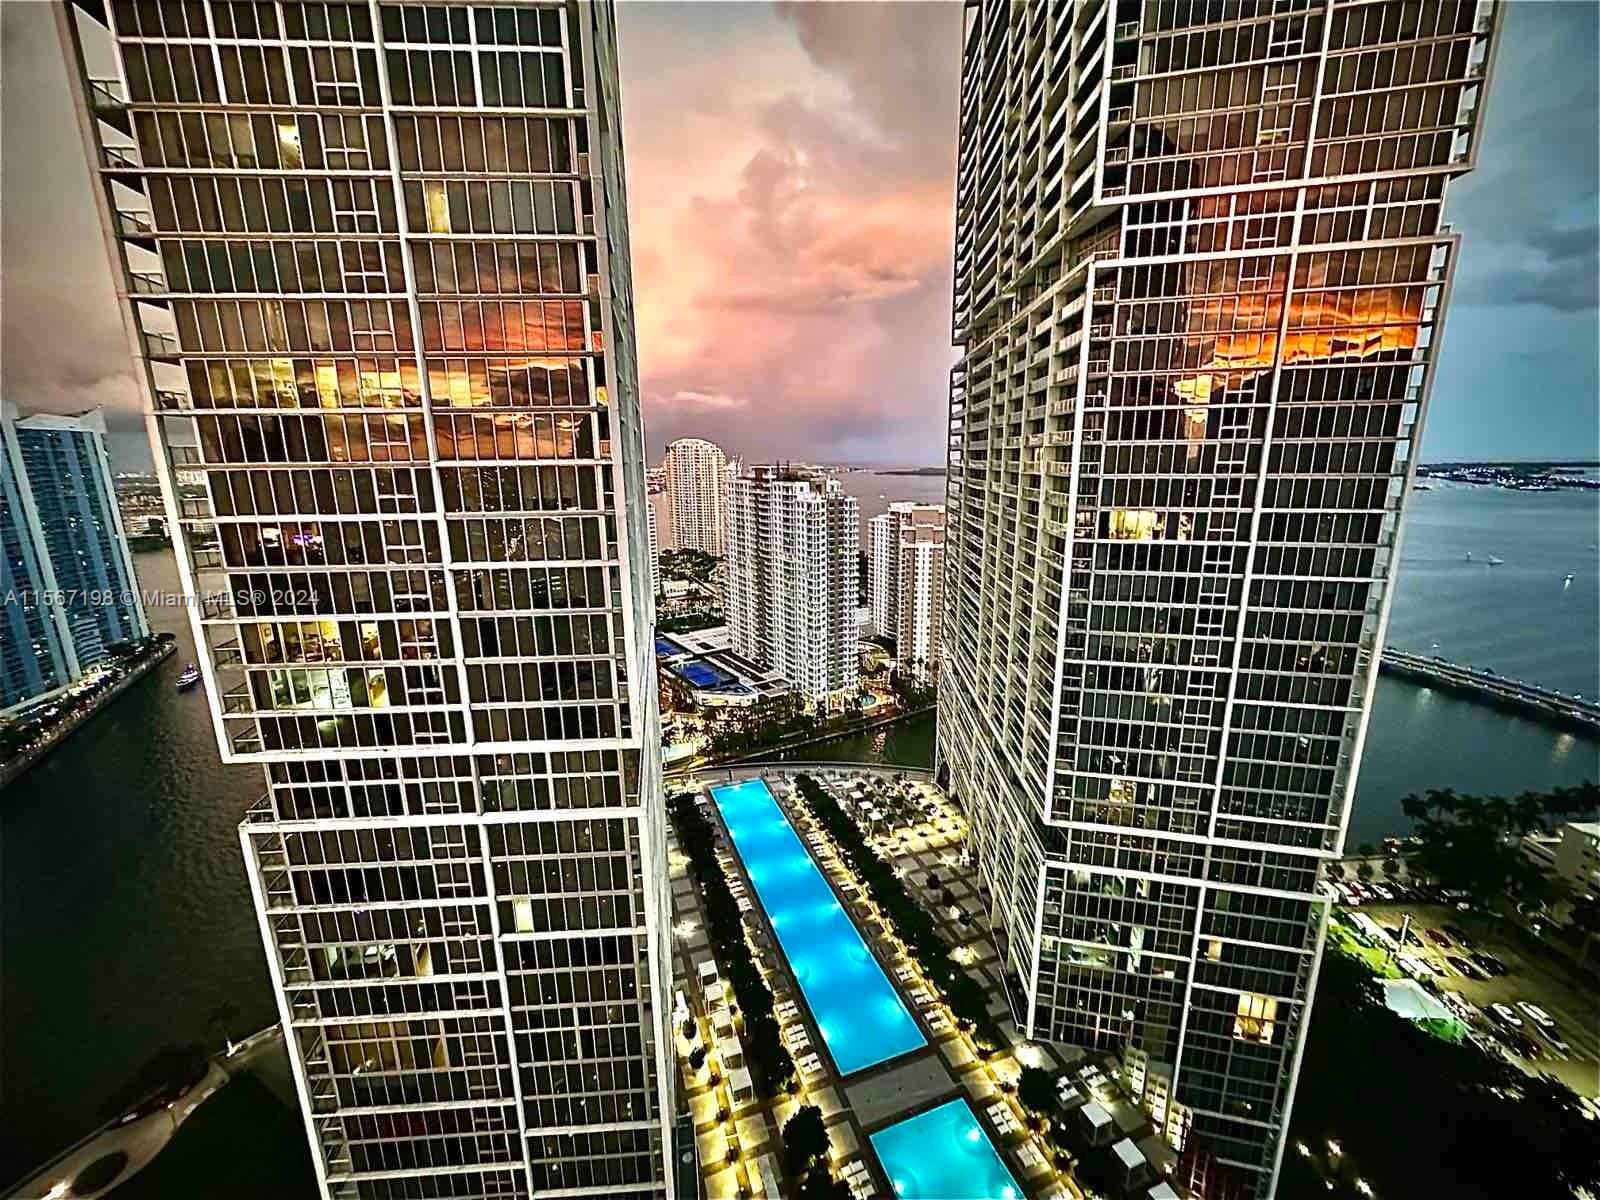 Investors dream with bay views from the best 01 line and 35th floor of Icon Brickell III. Short term rentals approved. Bright & spacious property fully renovated in 2019 by interior designer and fully equipped with a full-size washer/dryer, Italian cabinets, premium appliances by Wolf & Subzero and Bosch, as well as solid black granite, all furnitures, art works, HD Smart LED TVs included in sales price. Icon Brickell is famous for its world class amenities including state-of-the-art gym, pool, spa, bars/restaurants, & more. Currently professionally managed as a short term rental property. Hot water, cable, internet and valet parking is included in maintenance fee. Don't miss out. Contact Listing Agent to show. Live here full time or make $$$$$